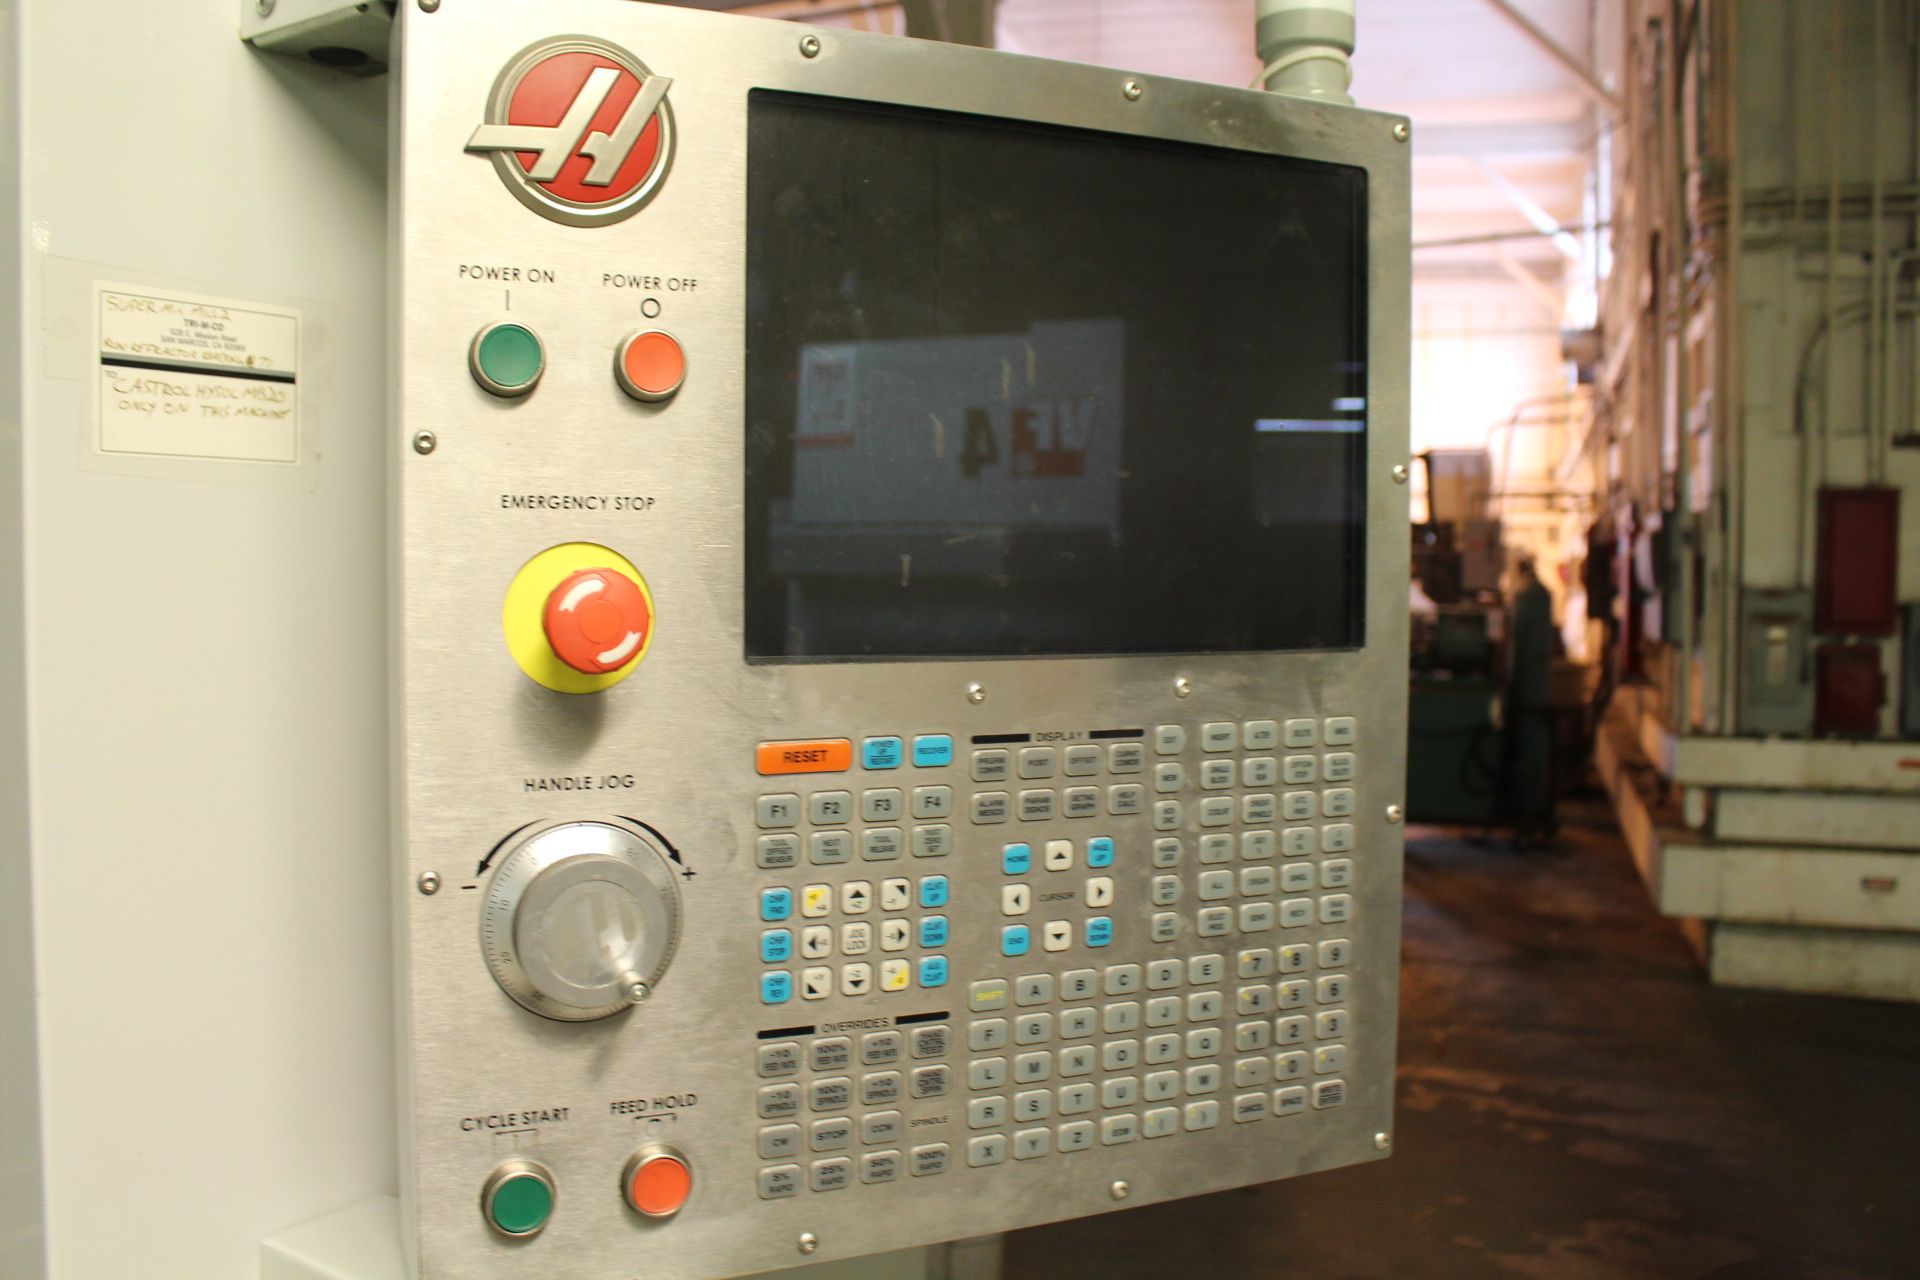 2012 HAAS SUPERMINI MILL 2 CNC VERTICAL MILL, S/N 1097695, 20" X, 16" Y, 14" Z, 40" X 14" TABLE, - Image 7 of 7